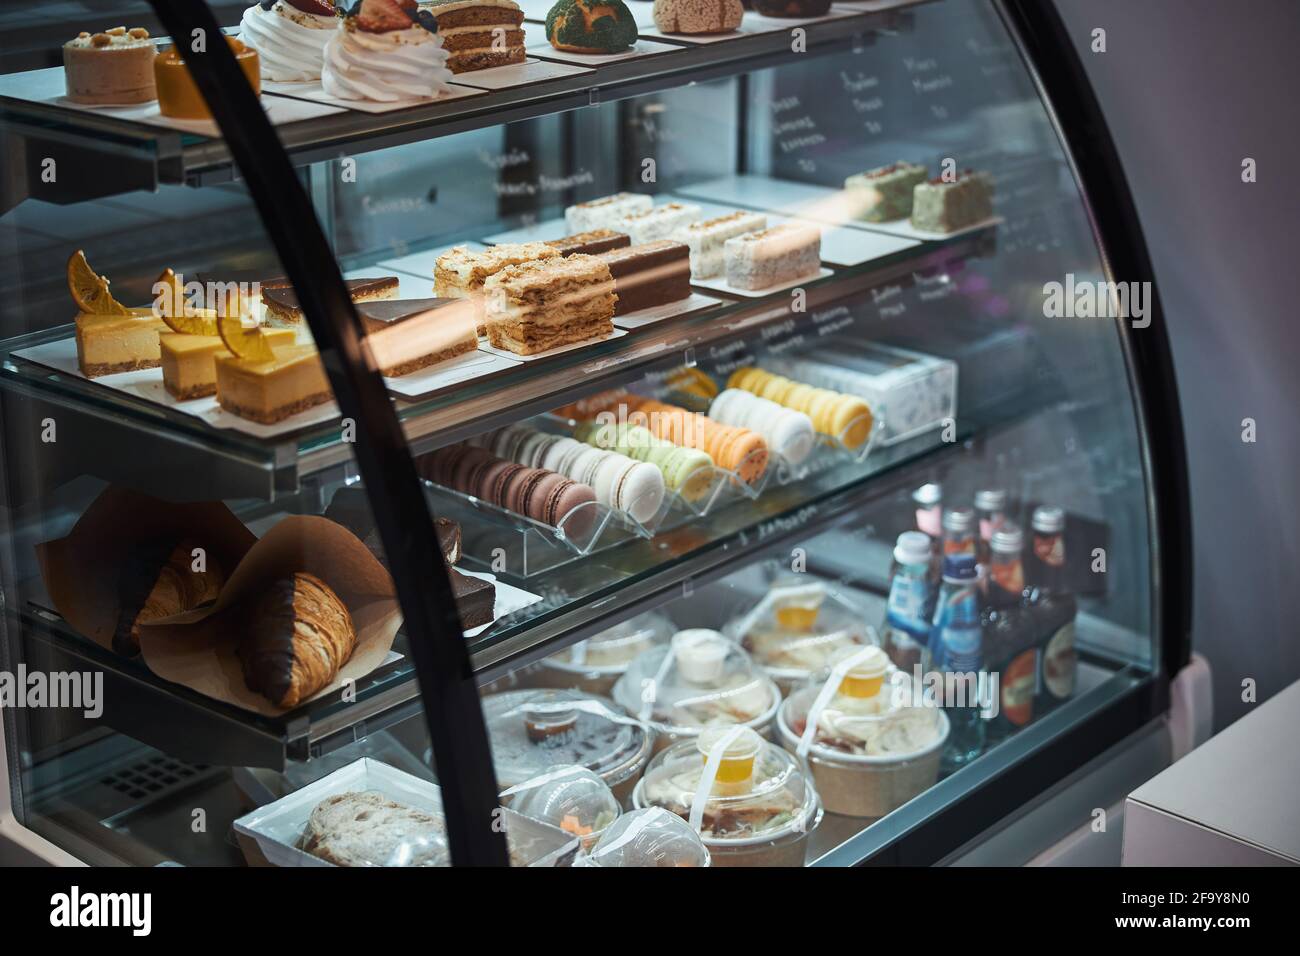 Diverse choice of miscallaneous desserts presented in cafe fridge Stock Photo